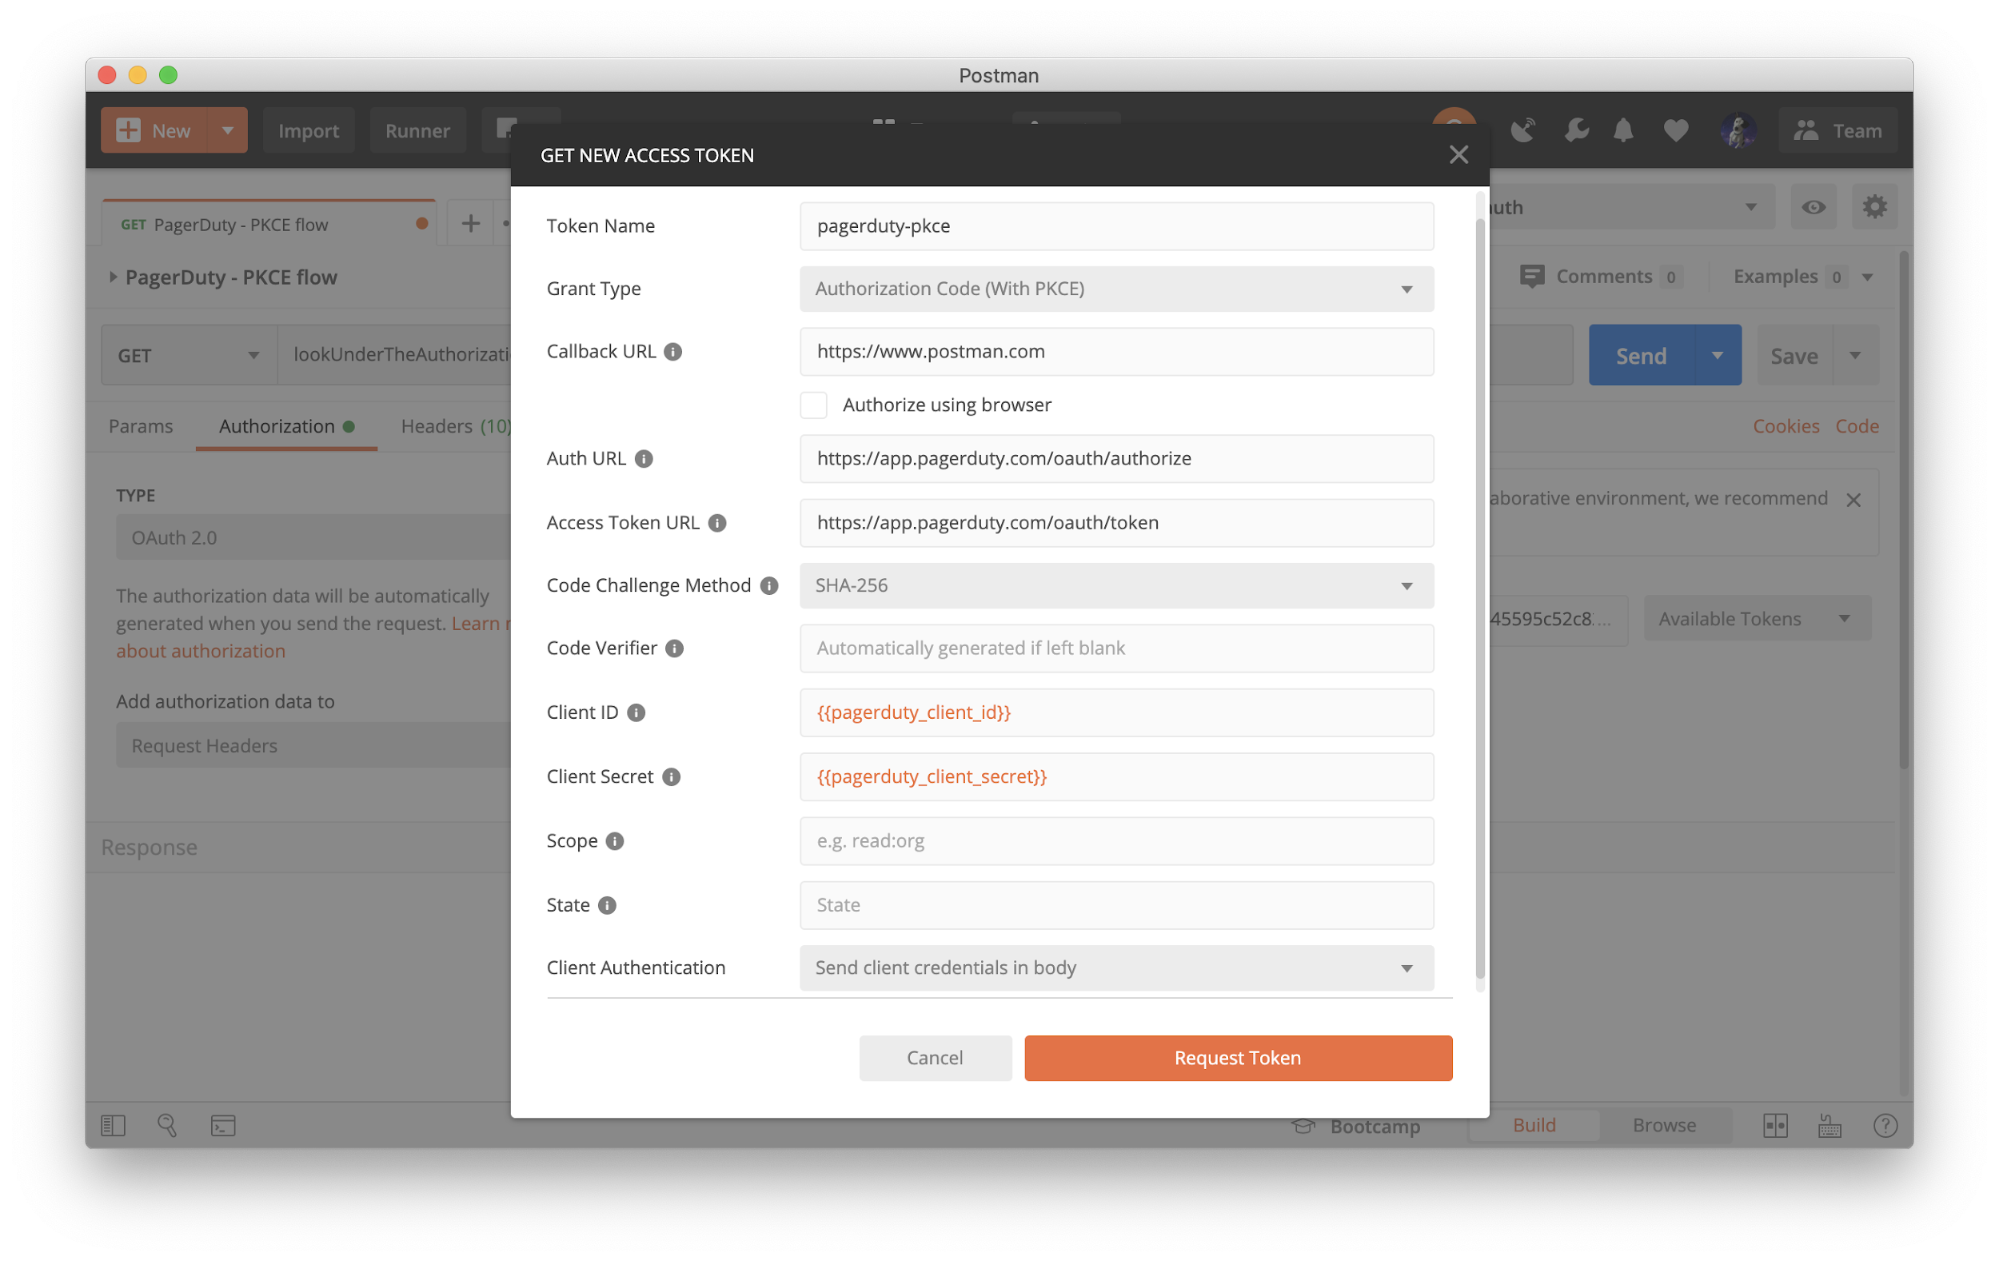 Setting up Authorization Code flow (with PKCE) in Postman